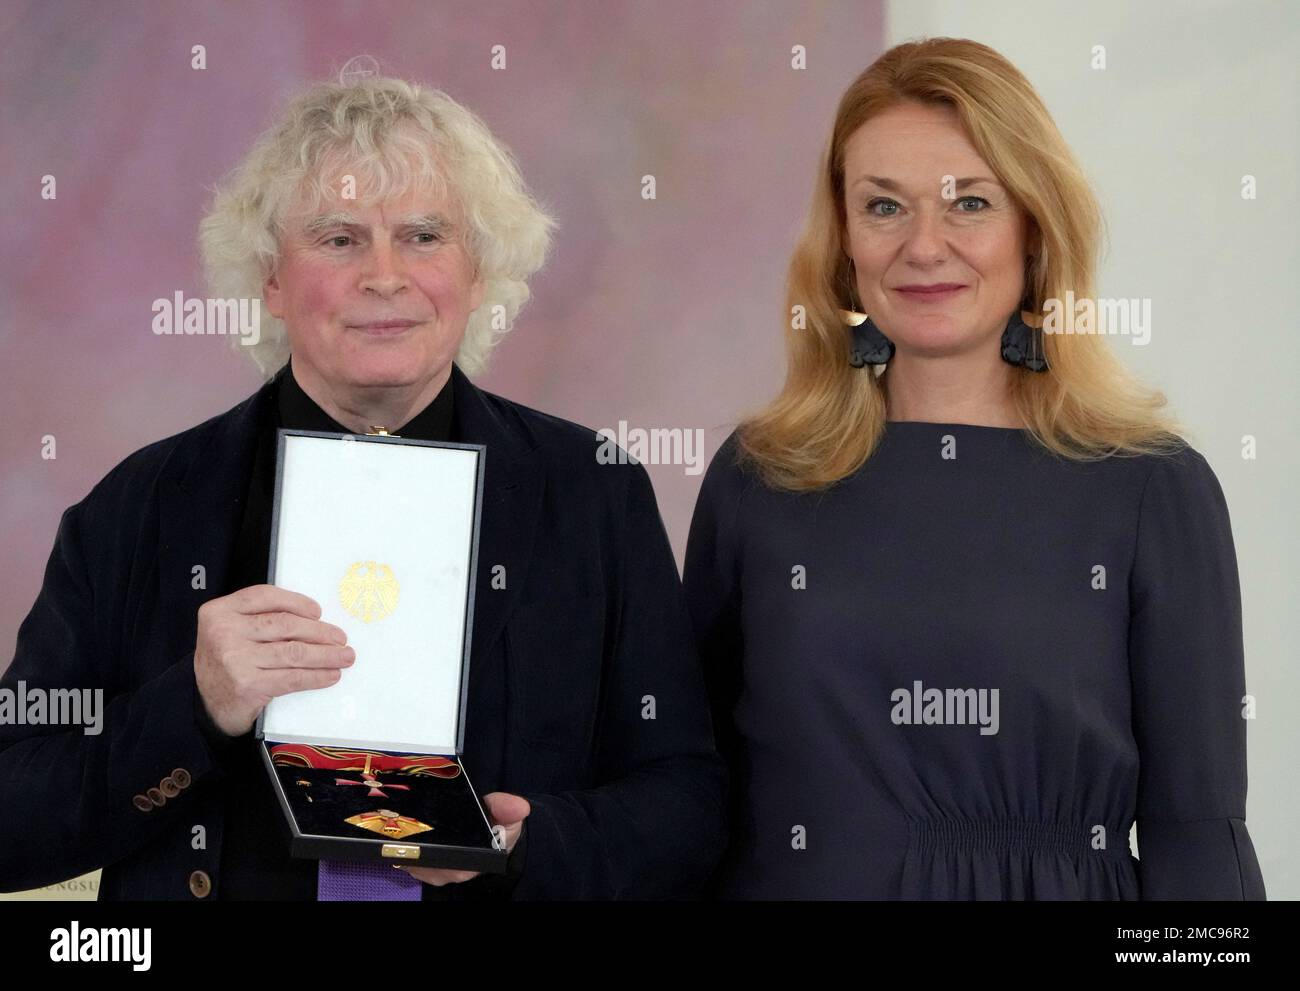 CORRECTS SPELLING OF MAGDALENA KOZENA - Conductor Simon Rattle, left, and  his wife Magdalena Kozena, right, pose for the media after Rattle received  the 'The Order of Merit of the Federal Republic